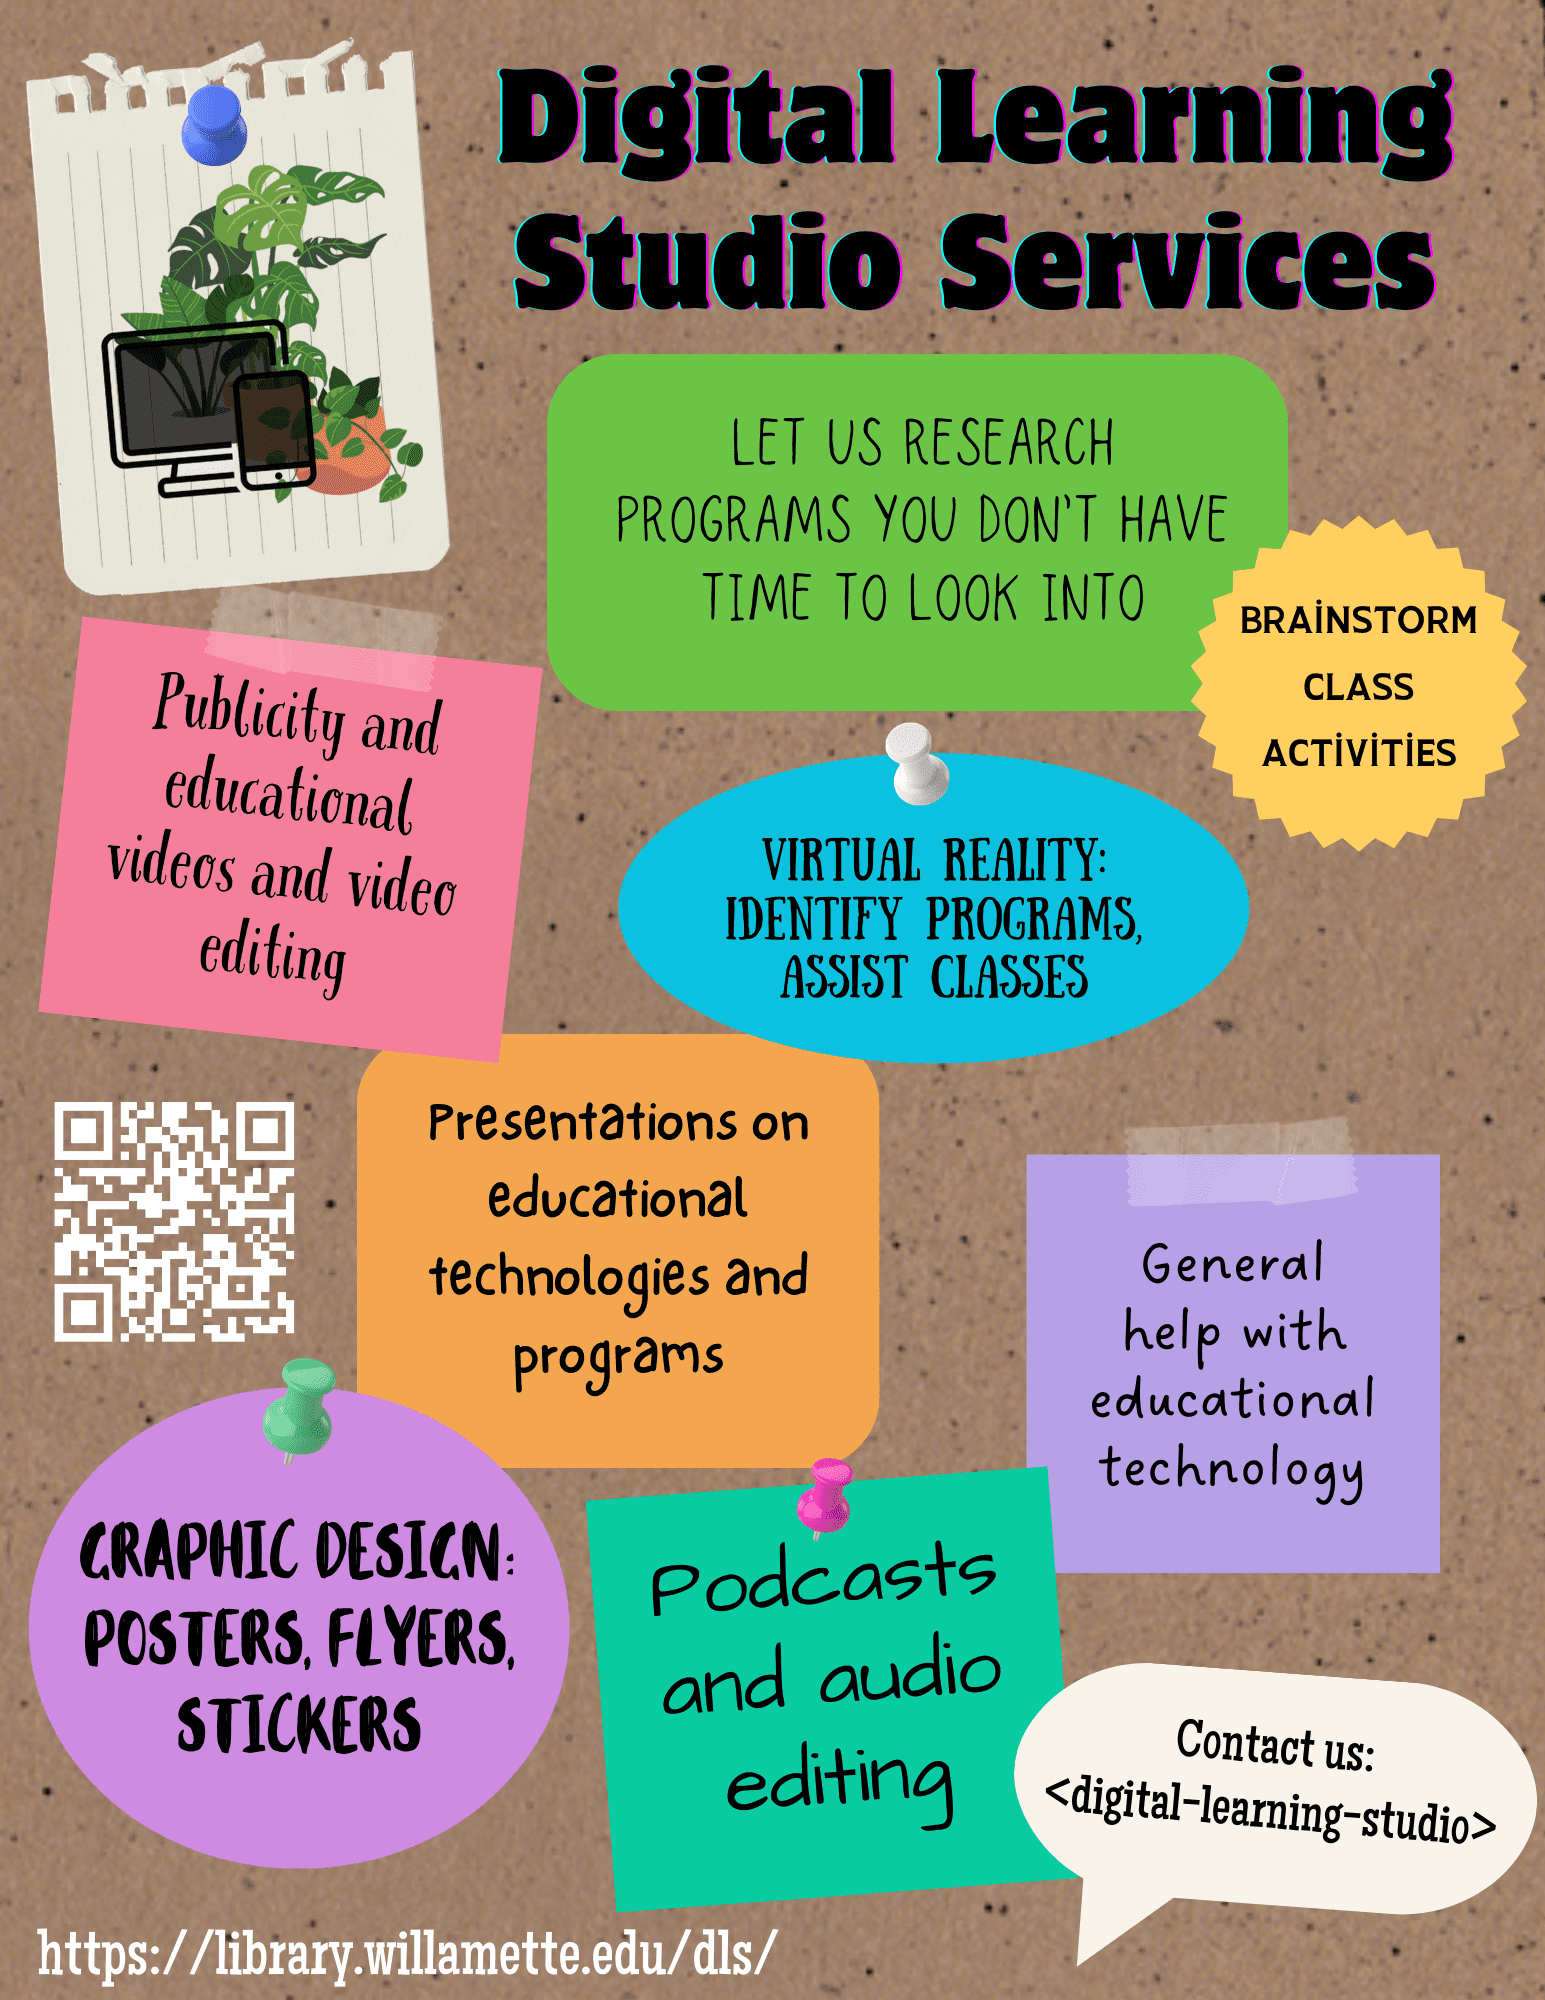 Flyer for services available to faculty through the Digital Learning Studio